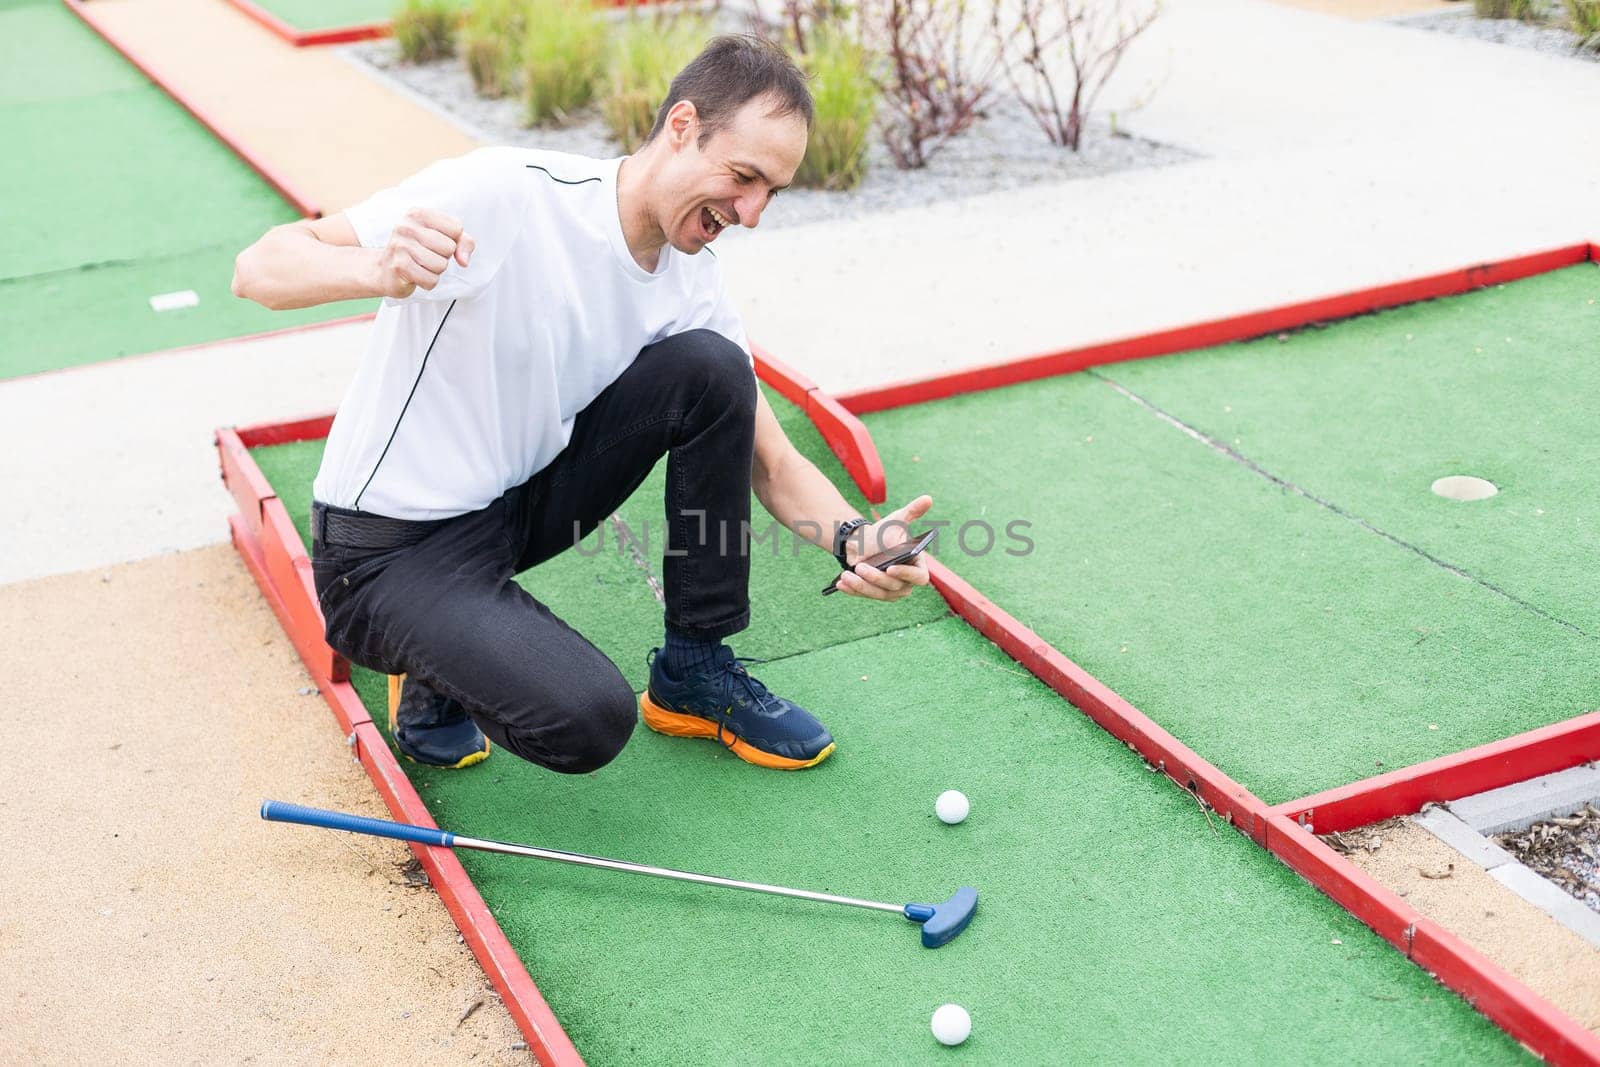 player looks at his hit on a mini golf course. High quality photo